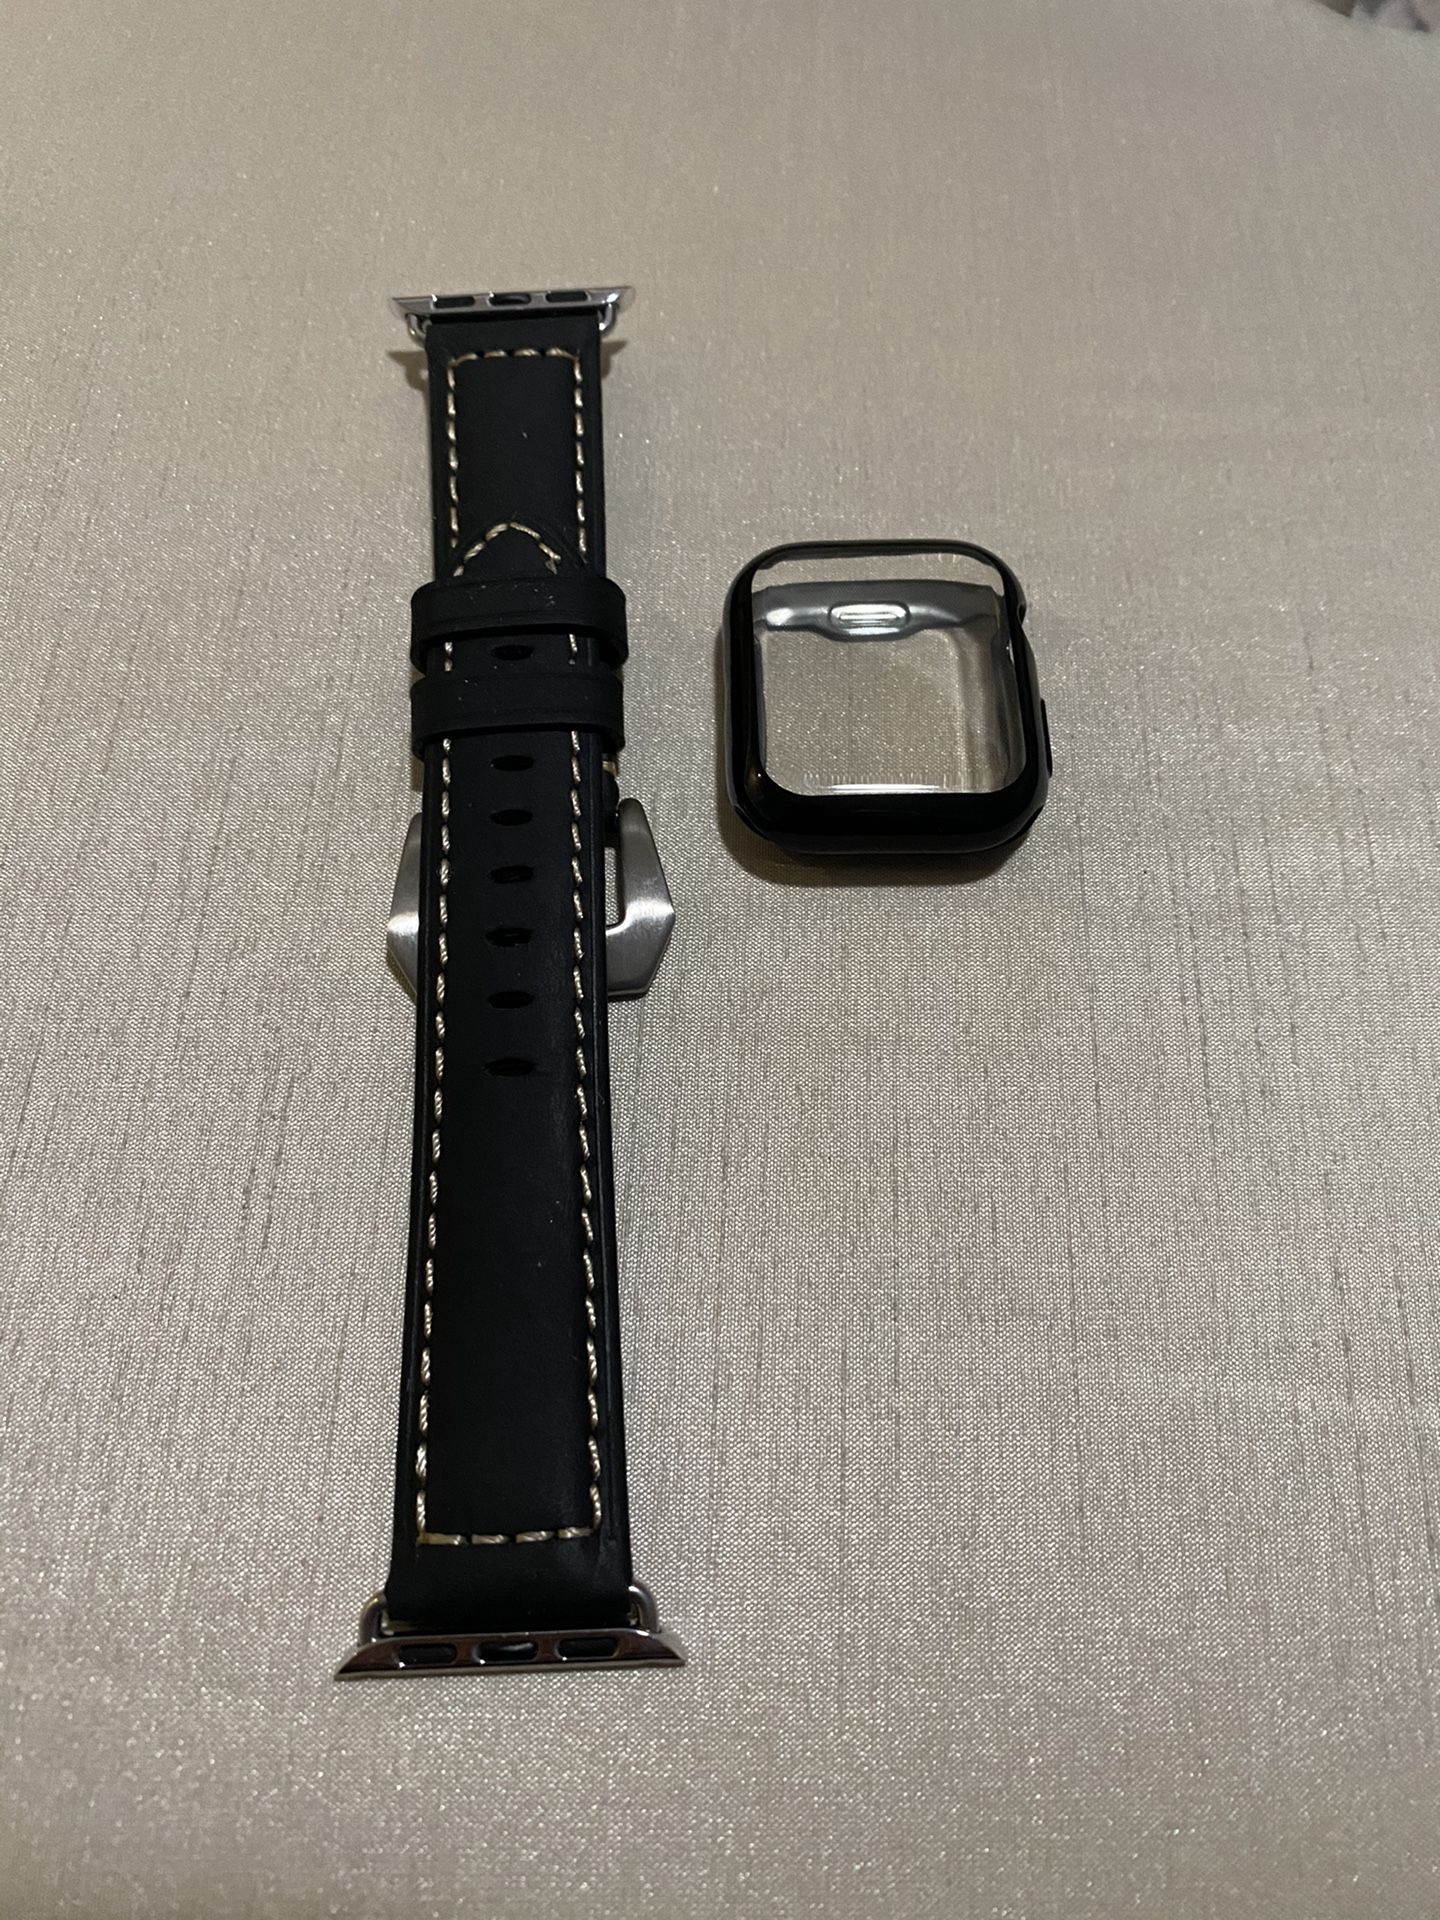 Apple Watch Band 38mm And Case